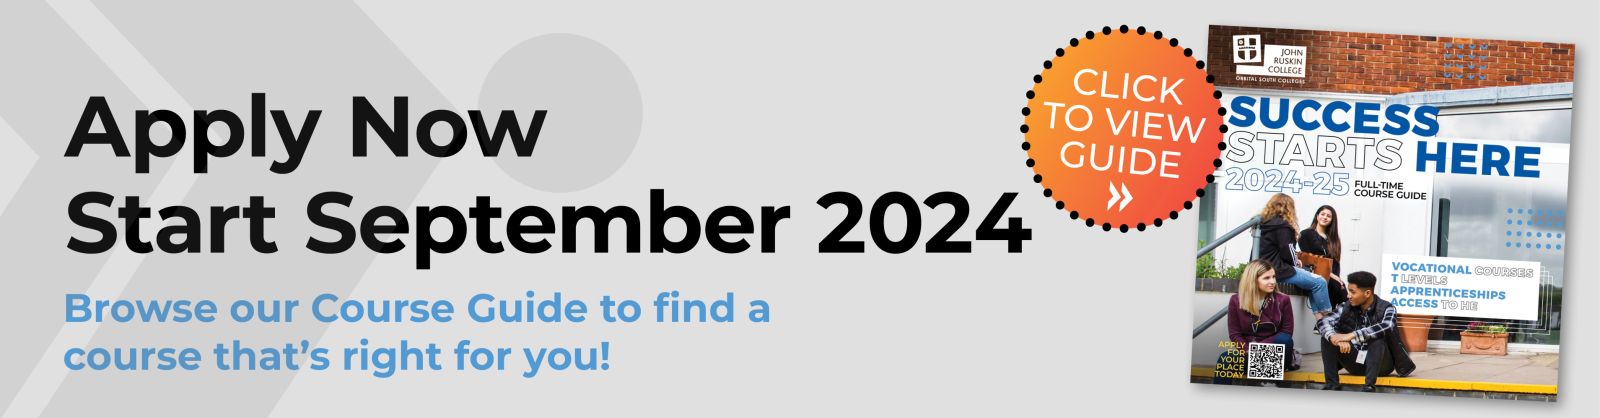 Apply now for a full time course for september 2024